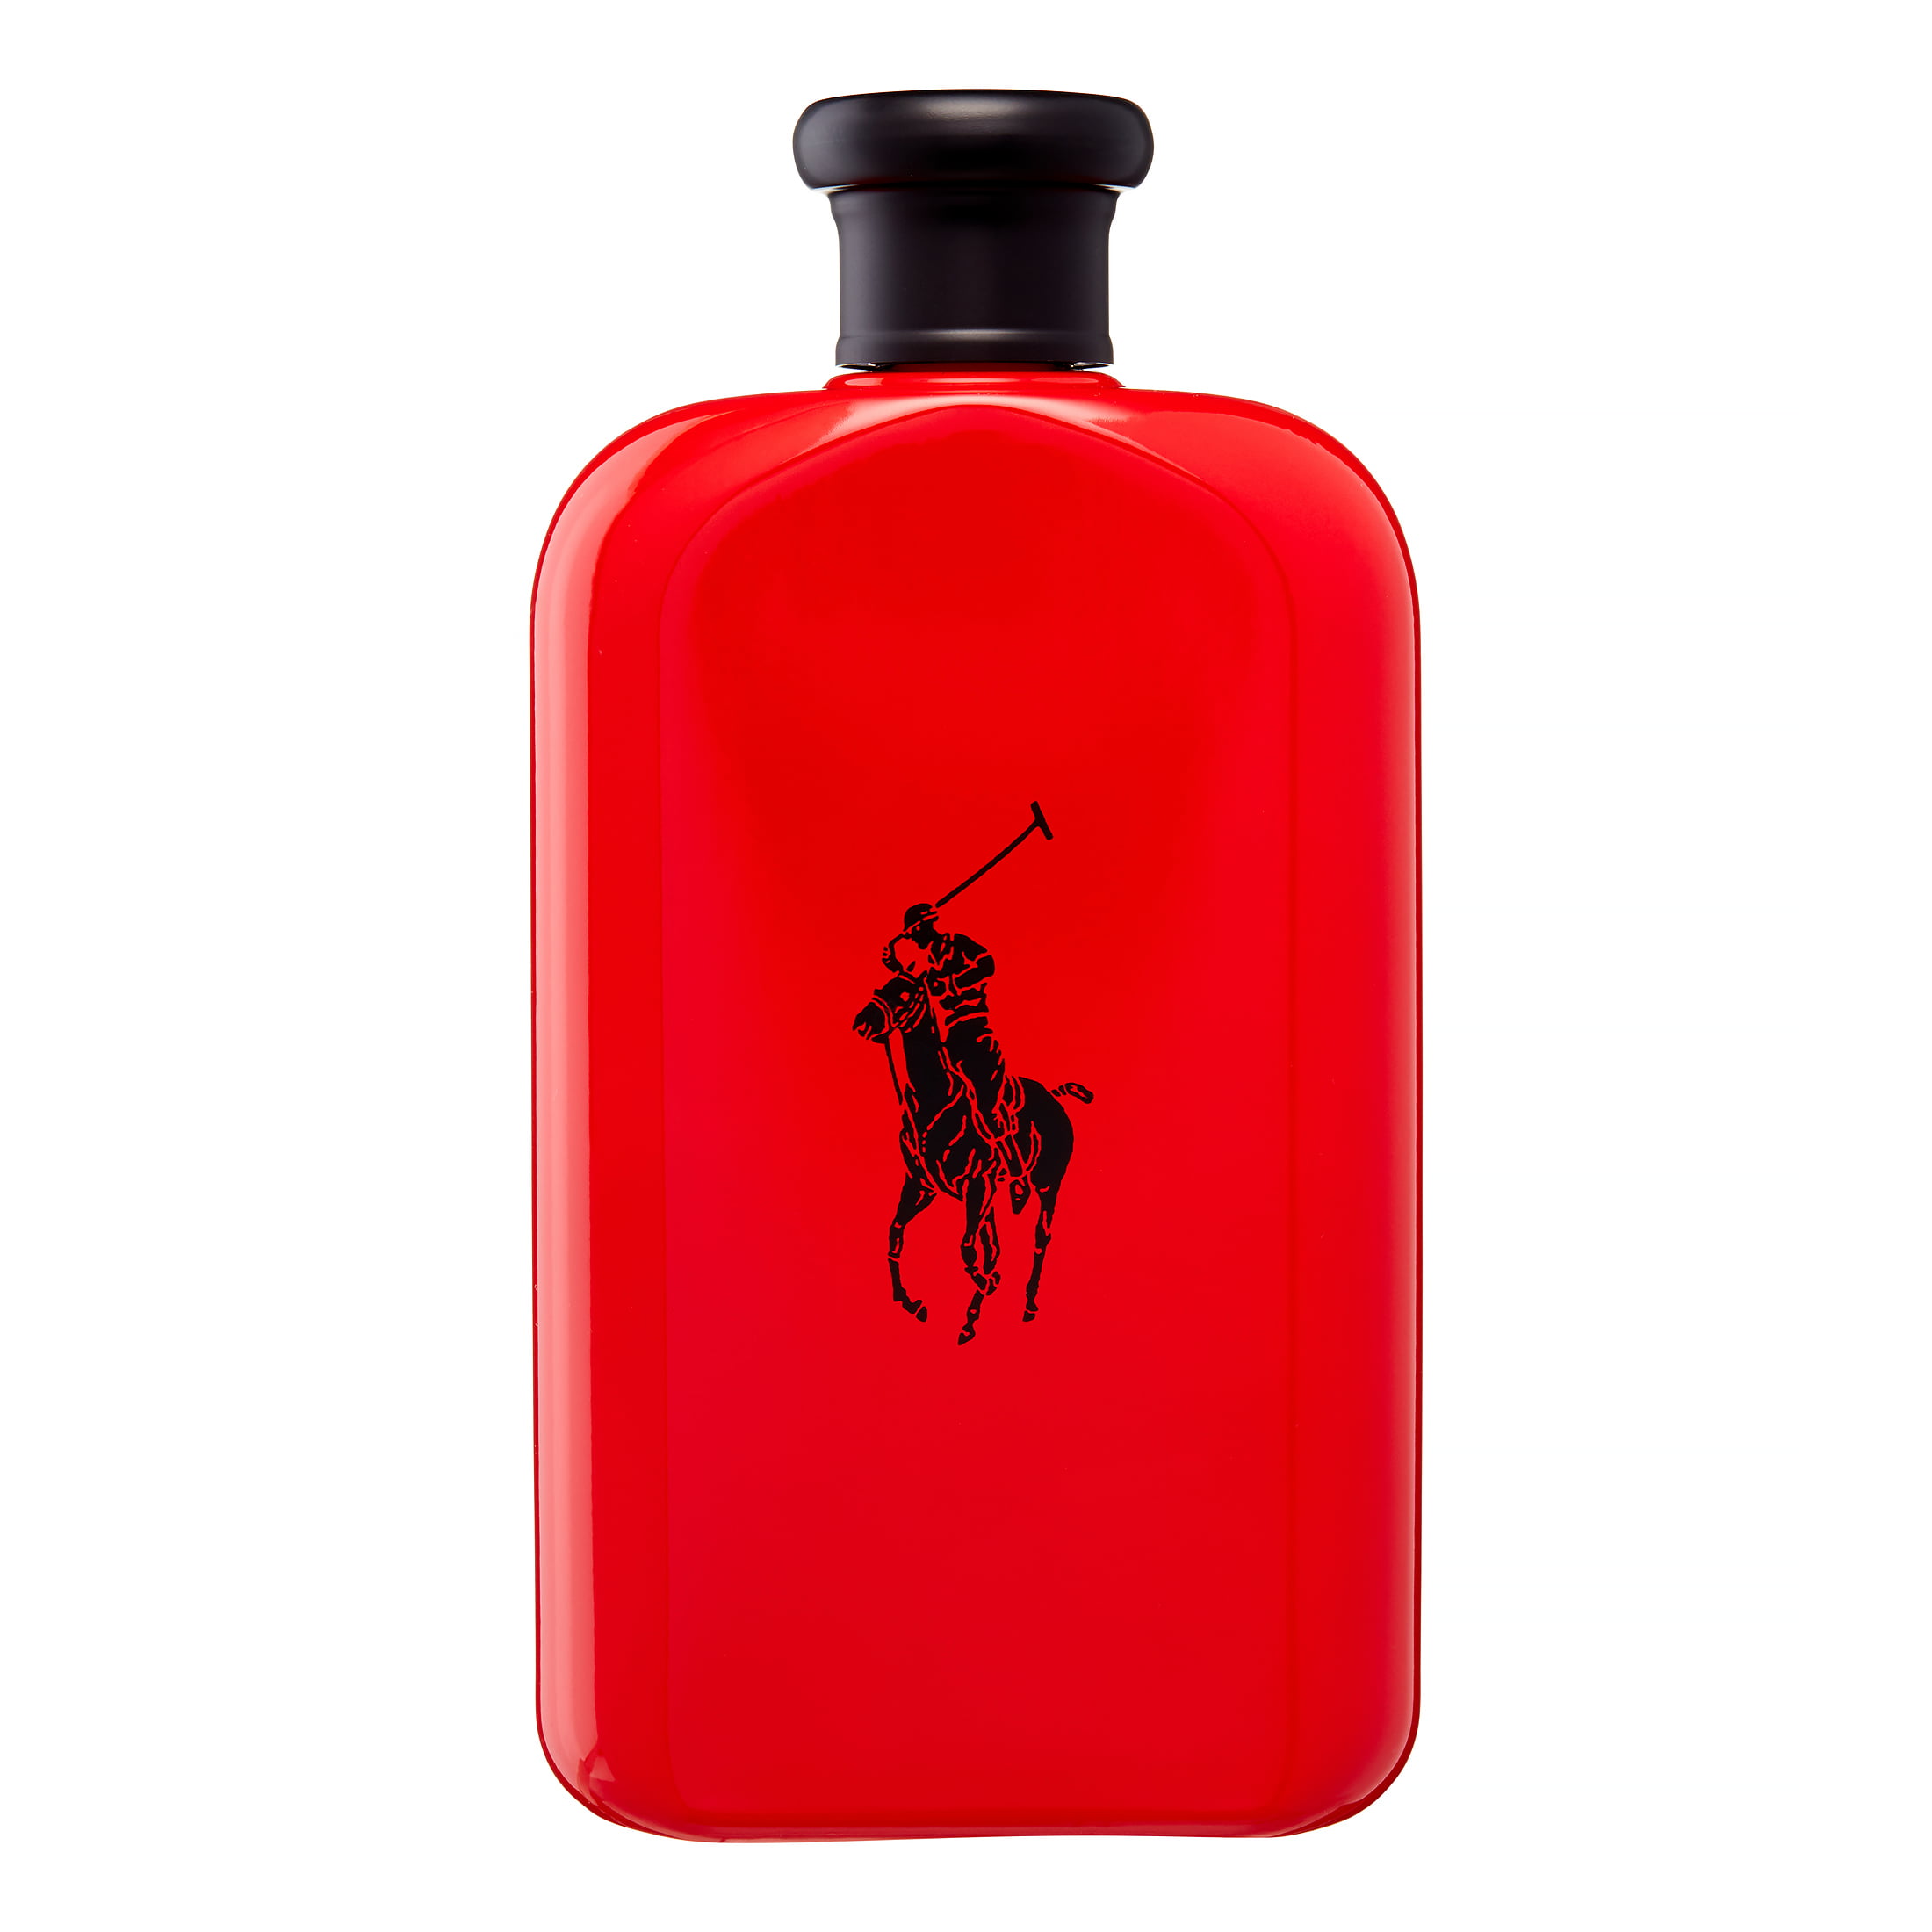 cologne similar to polo red